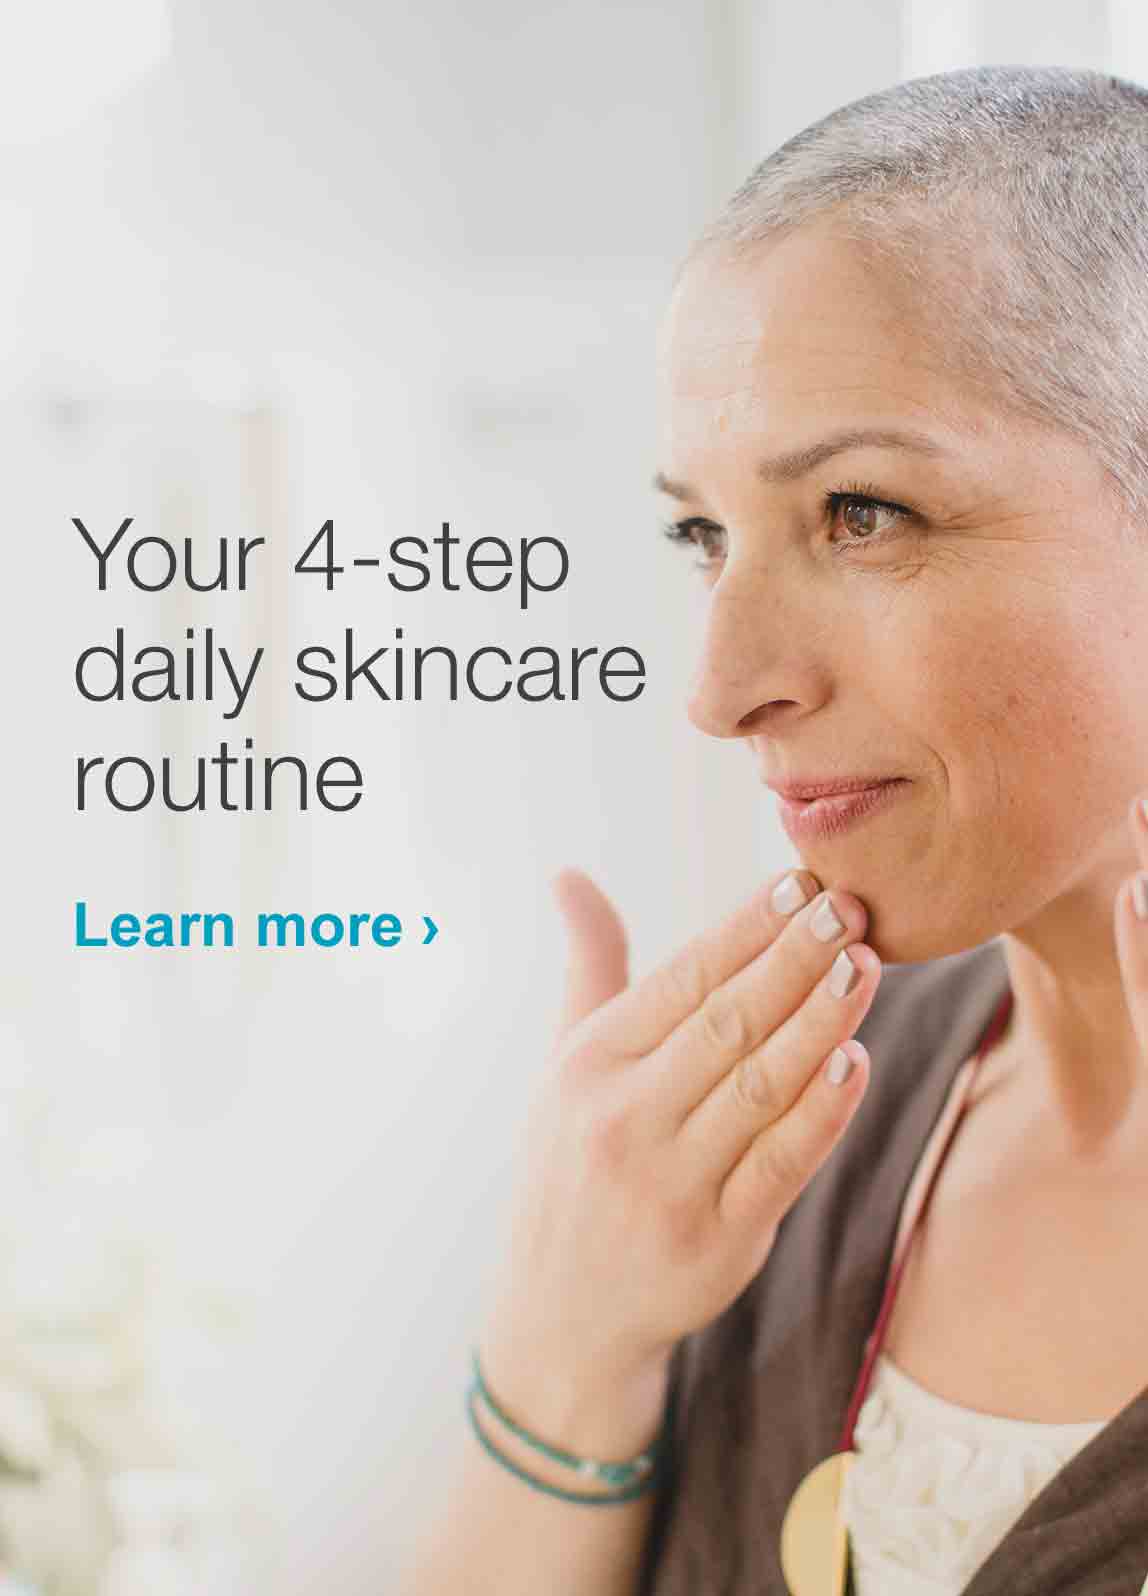 Your 4-step daily skincare routine. Learn more.